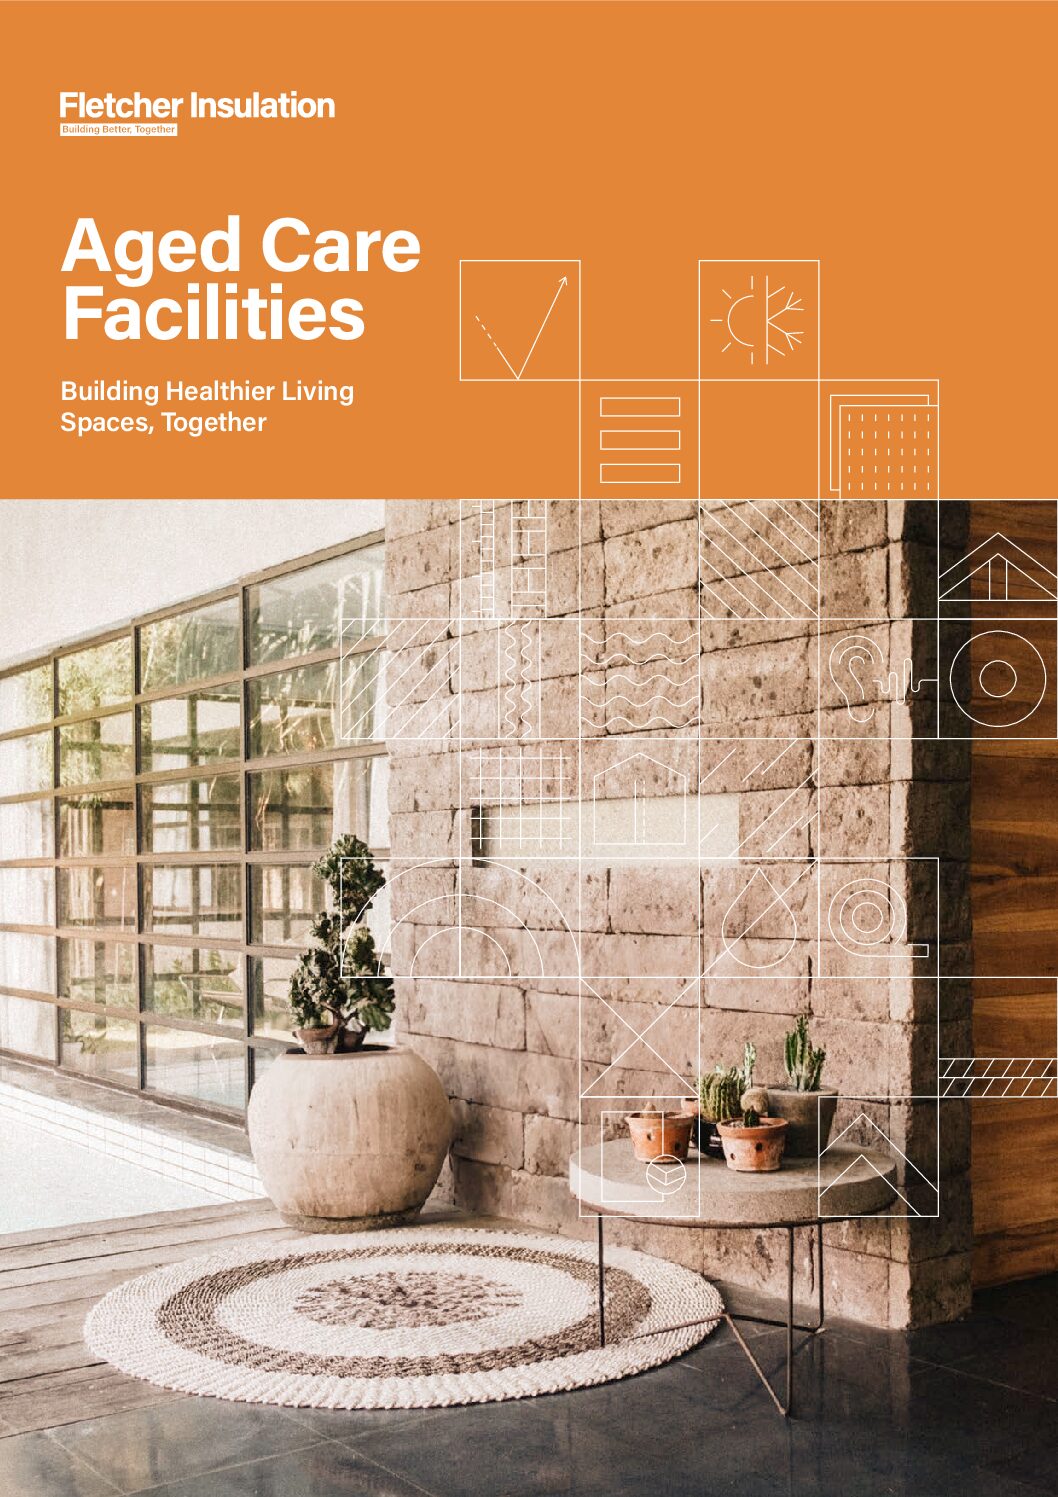 Aged Care Facilities – Building Healthier Living Spaces